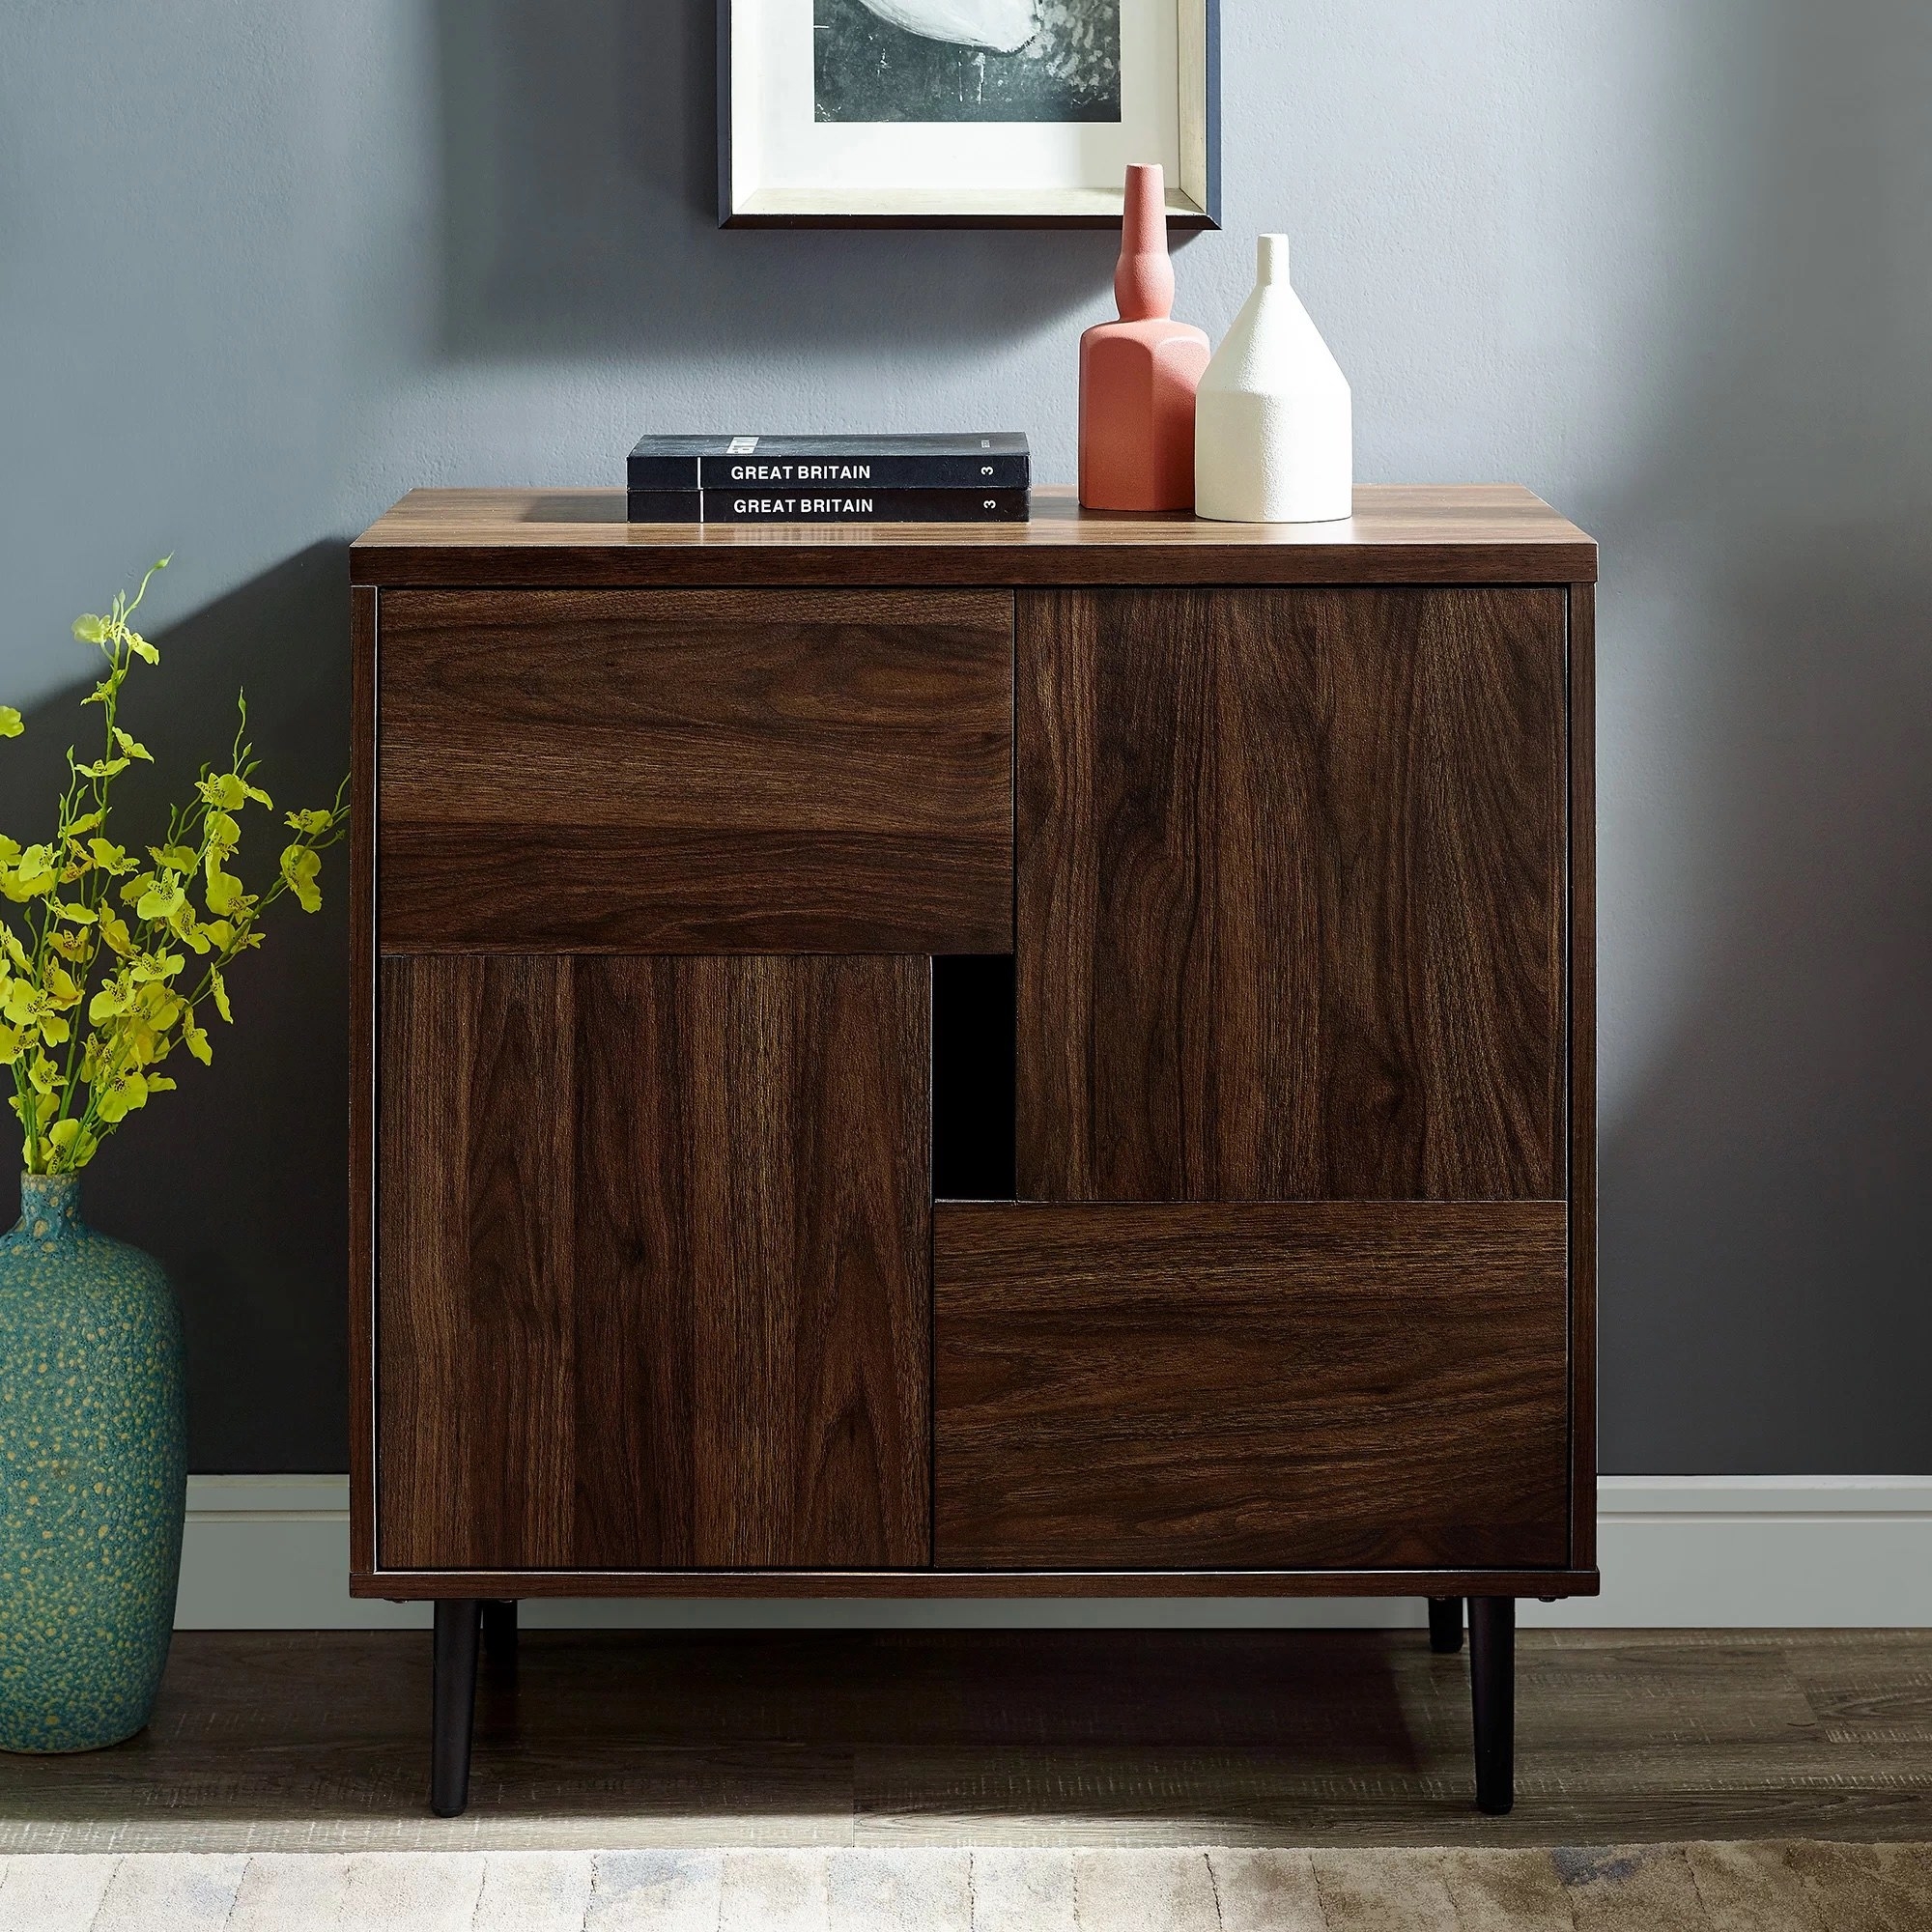 a square accent cabinet in dark walnut in a living room with books and vases on top